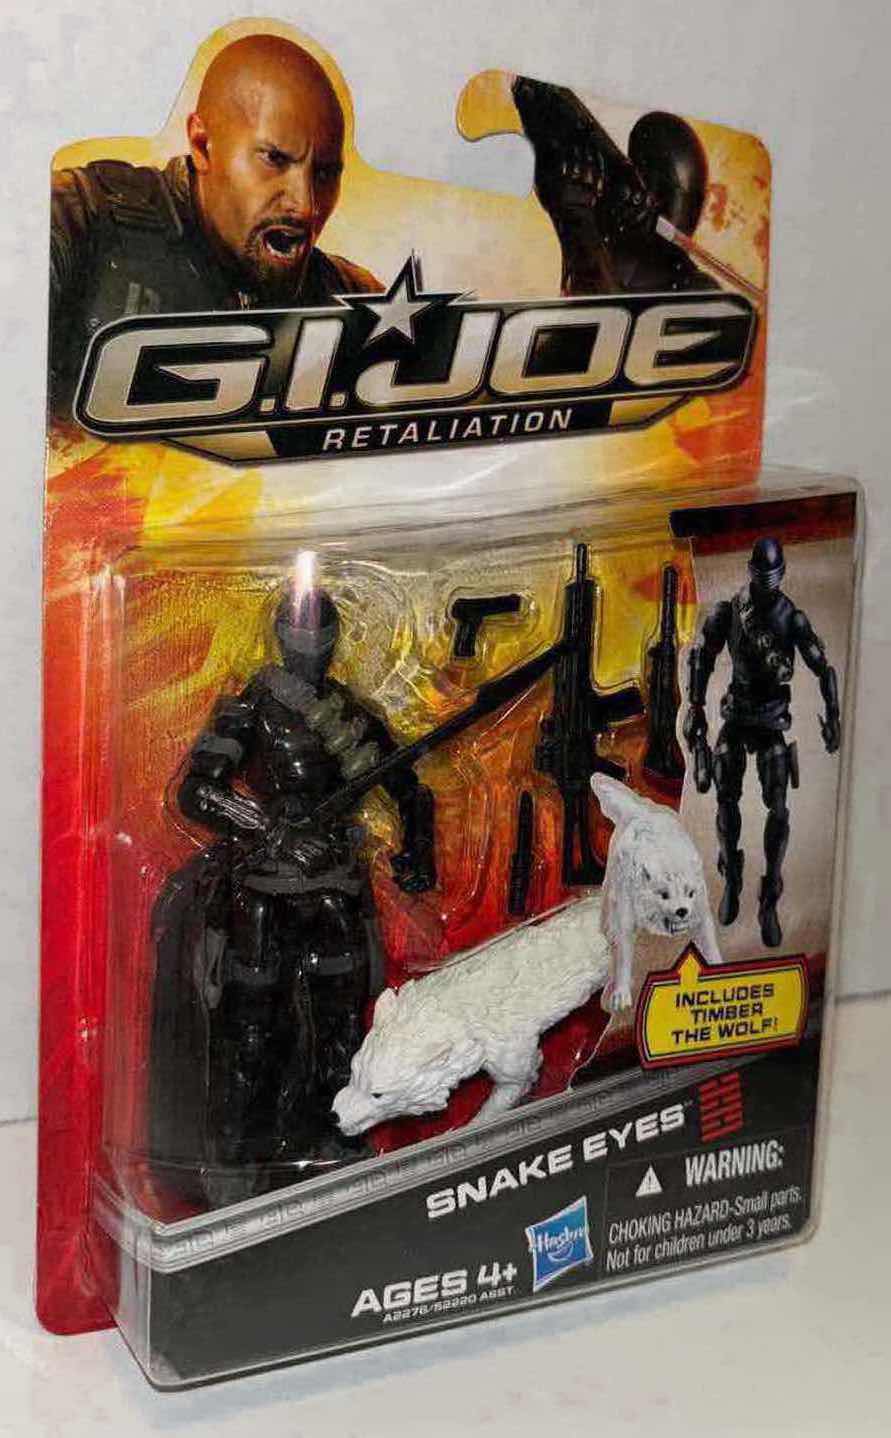 Photo 2 of NEW 2012 HASBRO G.I. JOE RETALIATION ACTION FIGURE & ACCESSORIES “SNAKE EYES” IN PROTECTIVE CLEAR CLAMSHELL CASE